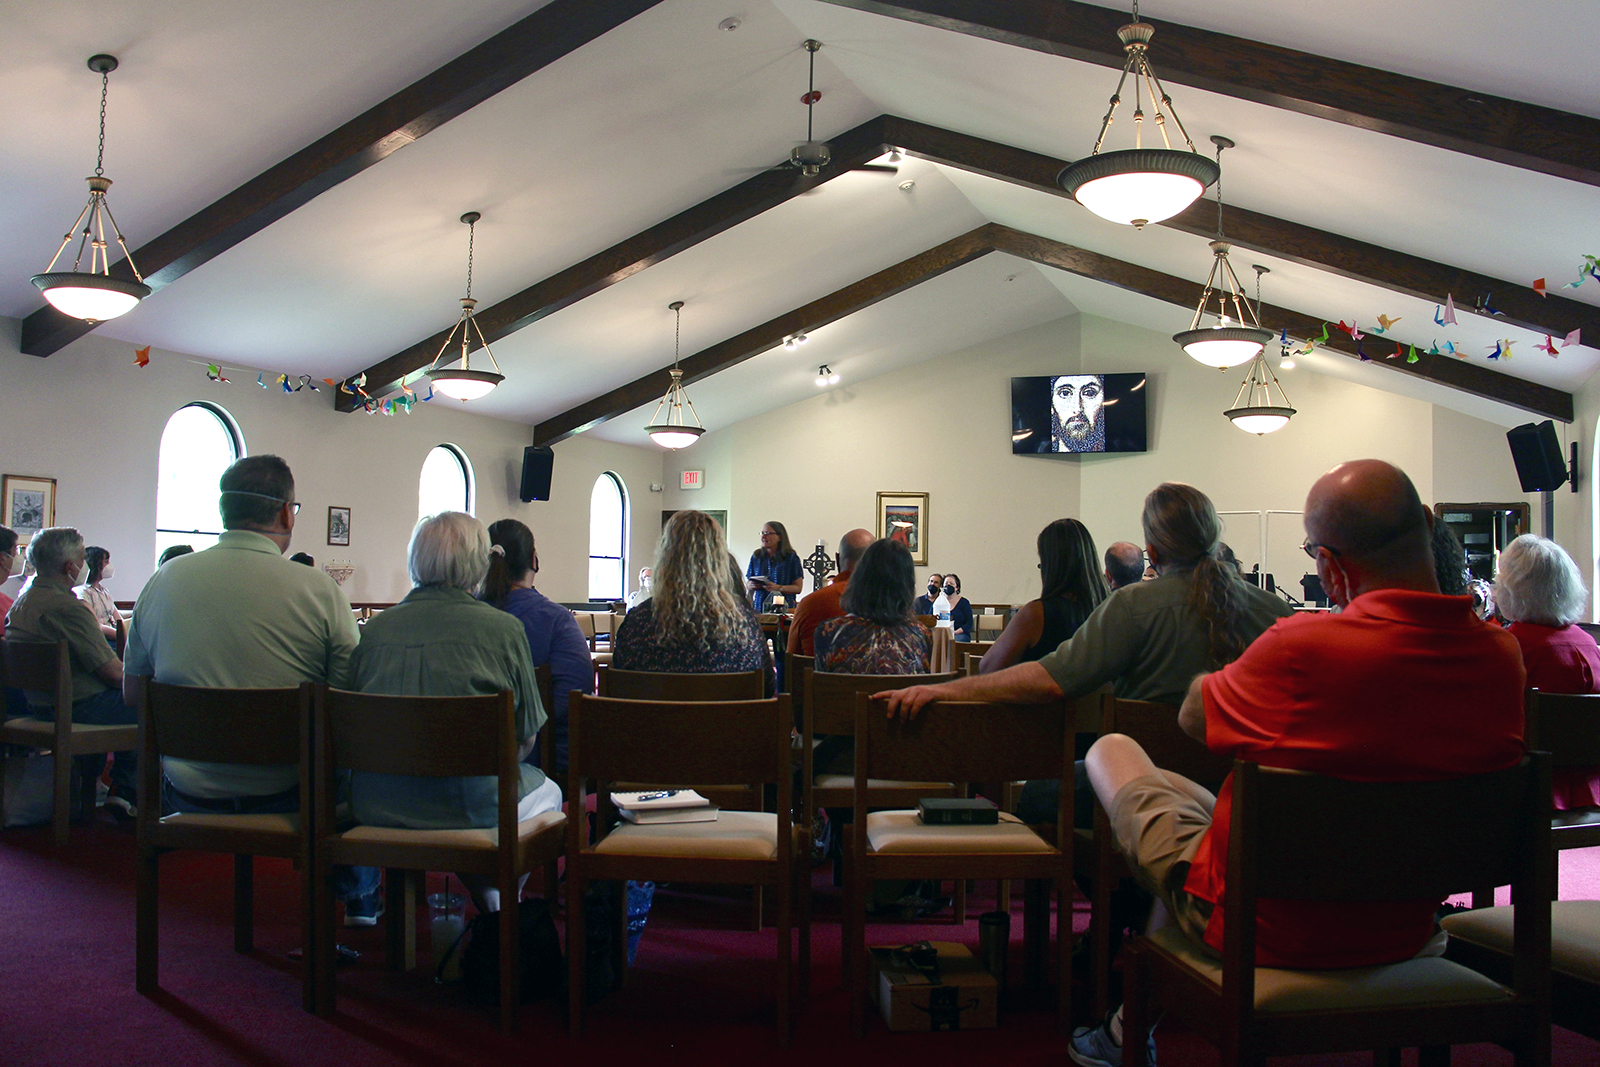 The congregation at Life on the Vine Church in Long Grove, Illinois, on May 15, 2022. RNS photo by Emily McFarlan Miller